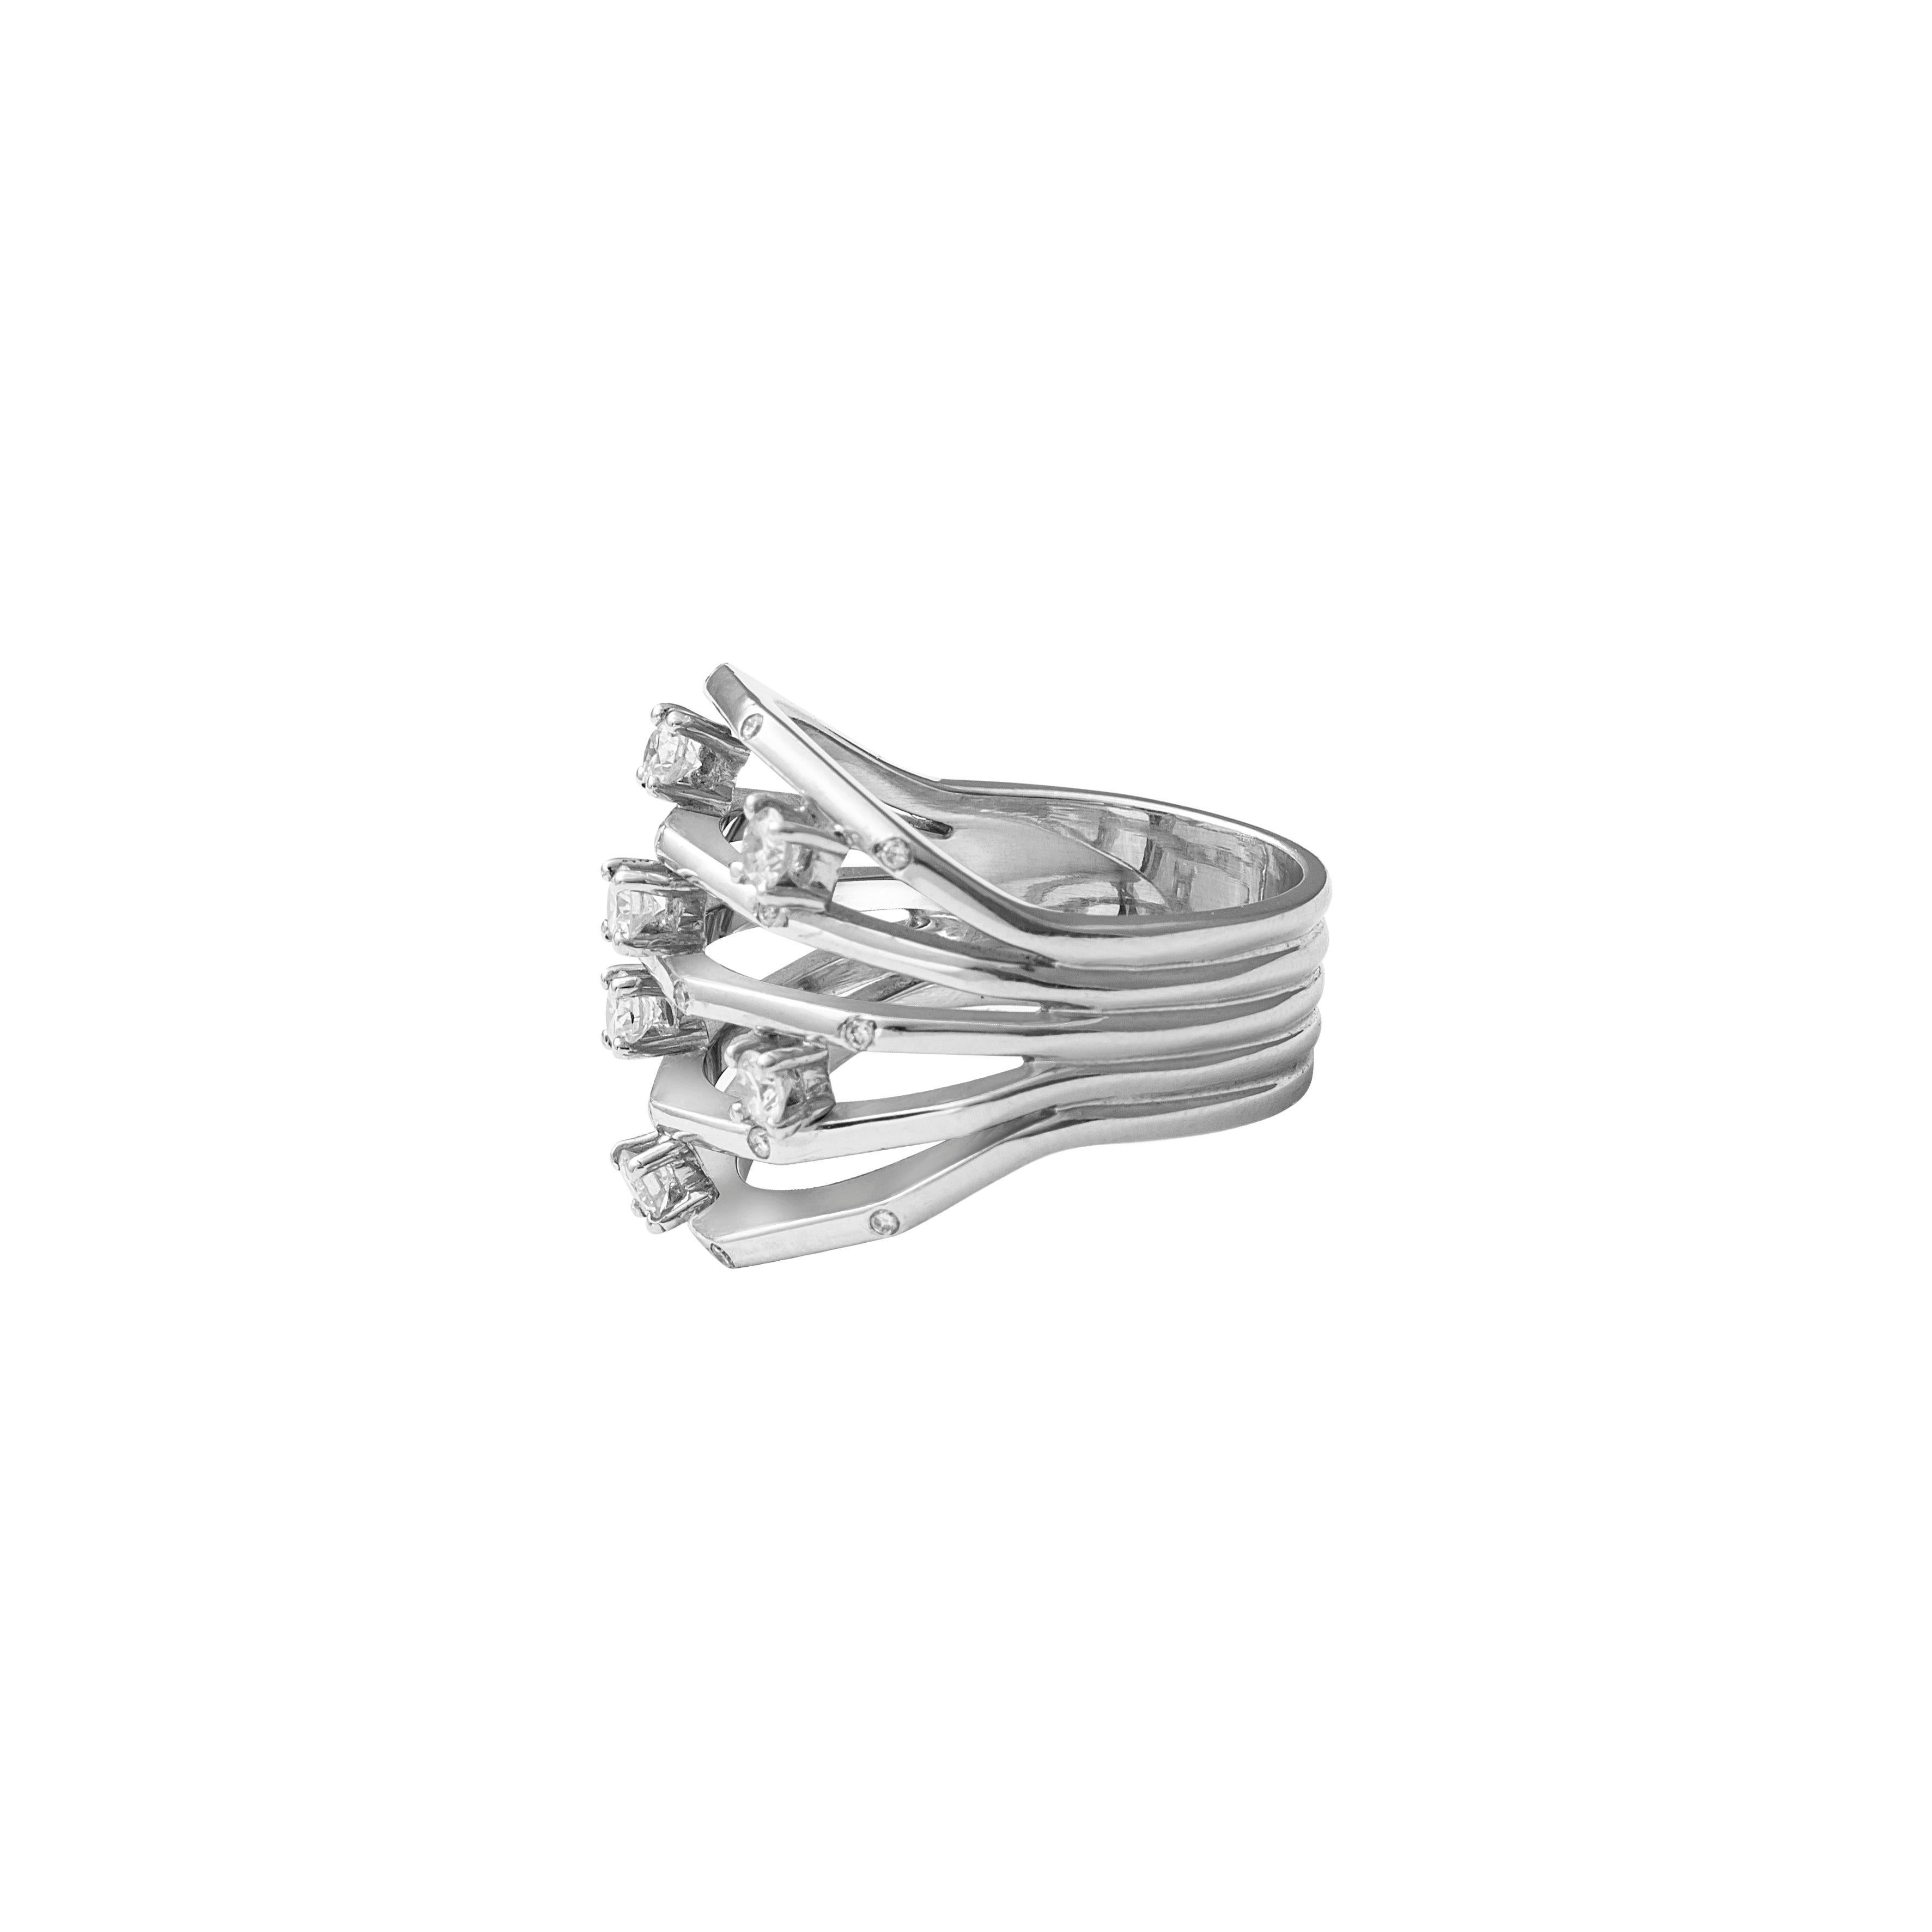 18 Karat White Gold Diamond Cocktail Ring

This unique design, expertly crafted is ideal for an evening out. Set on 18 karat white gold and studded with 0.60ct round diamonds, this ring is sure to grab attention.

Diamonds - 0.60cts
18 Karat Gold -